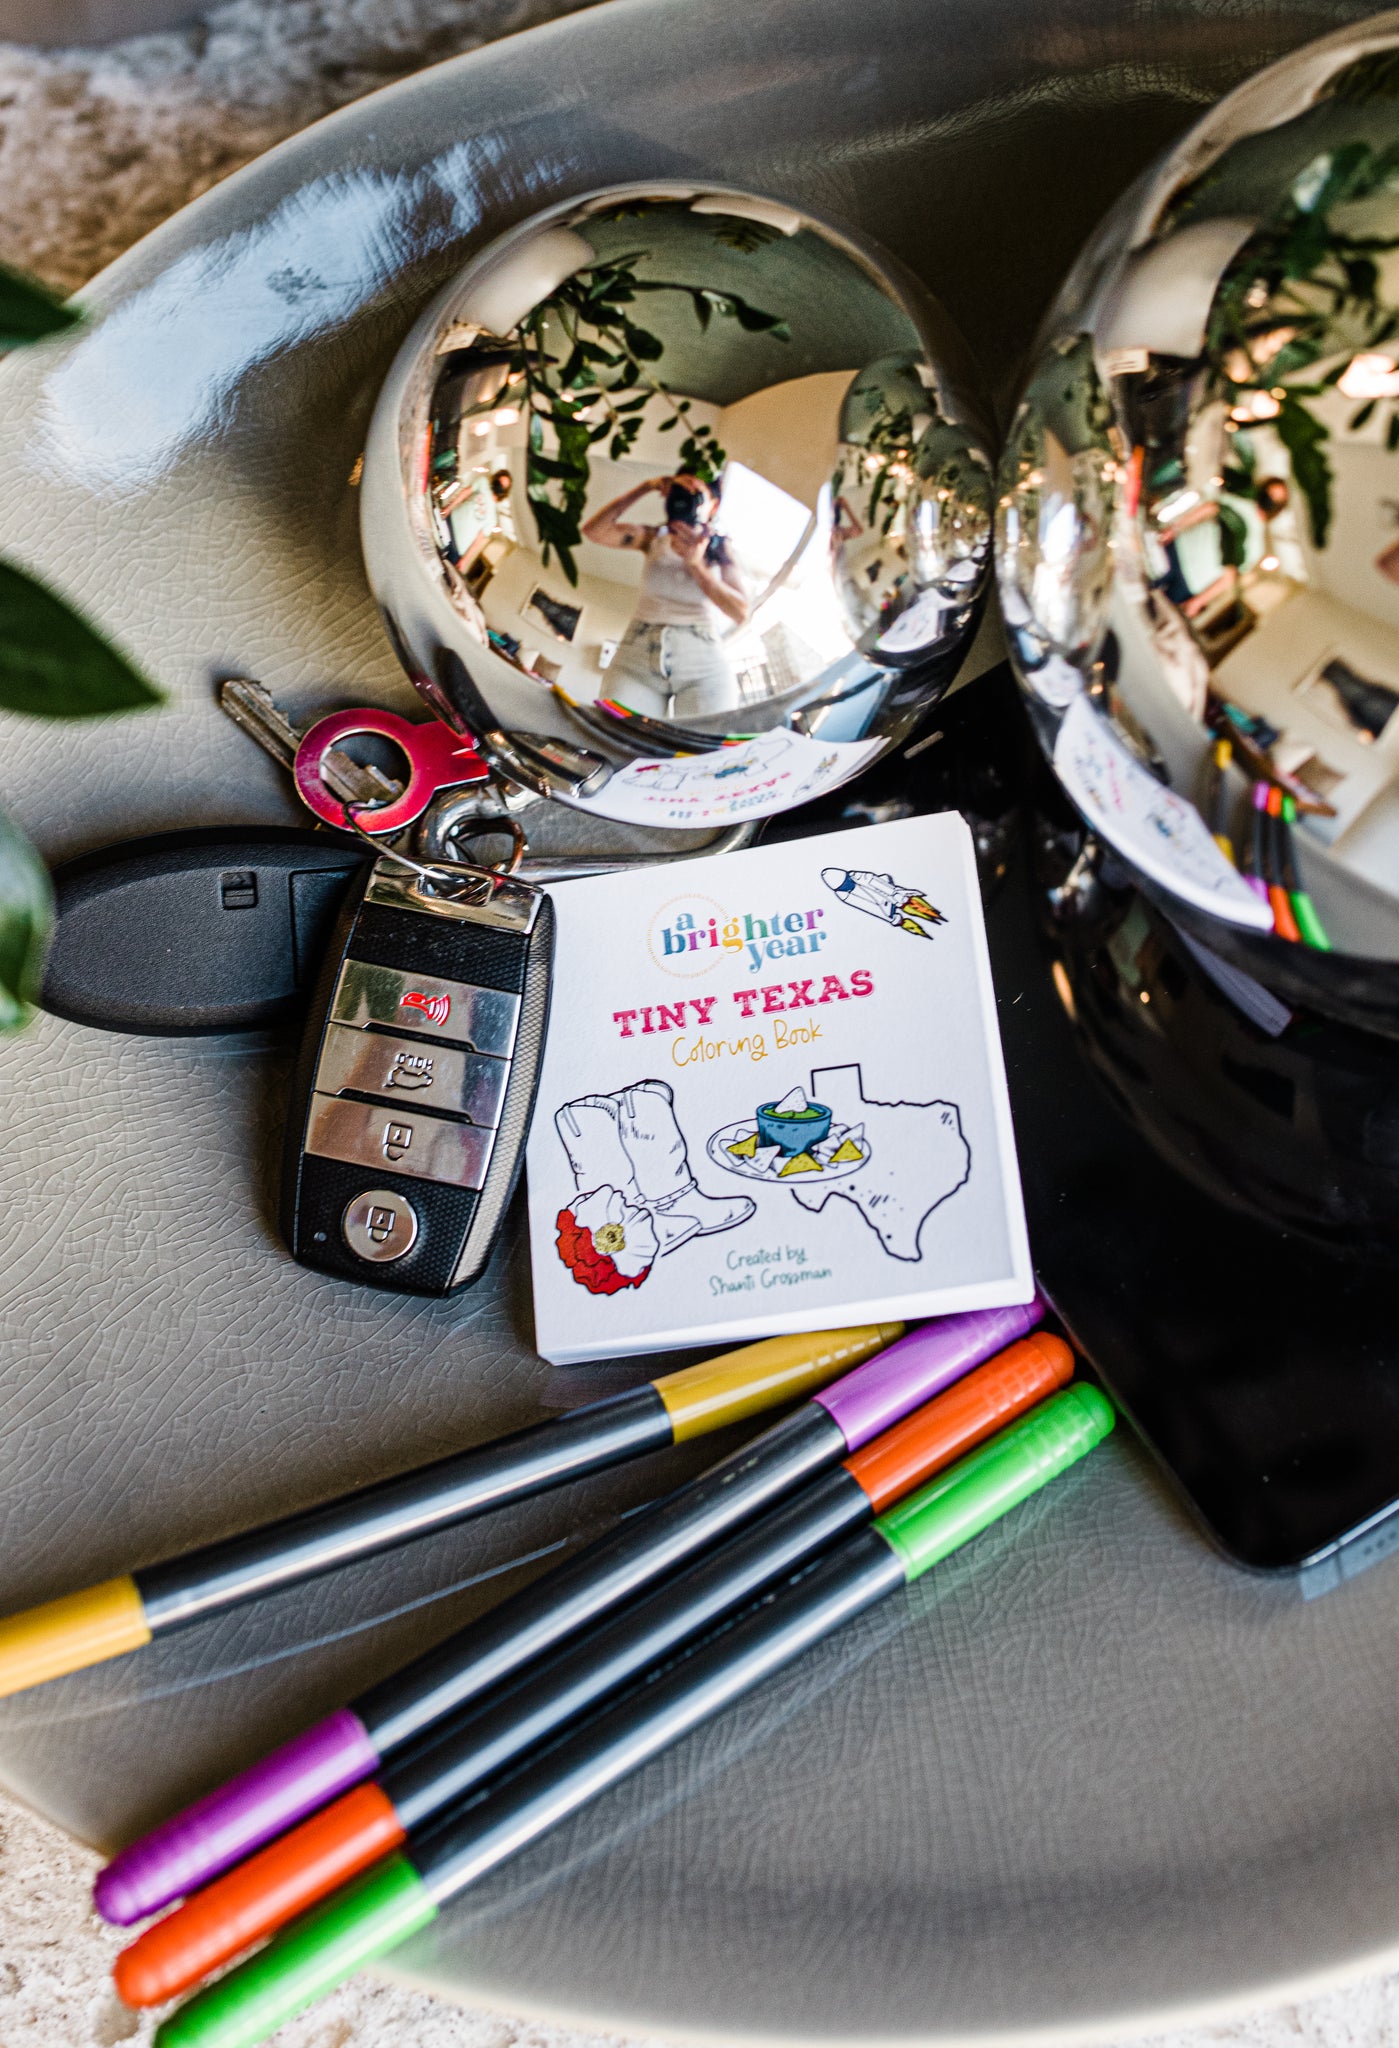 A Brighter Year - Tiny Texas Coloring Book. Pocket Size Mini Coloring Book.  Small Gifts for Coworkers 3x3 inches On-The-Go Travel Size Coloring Book.